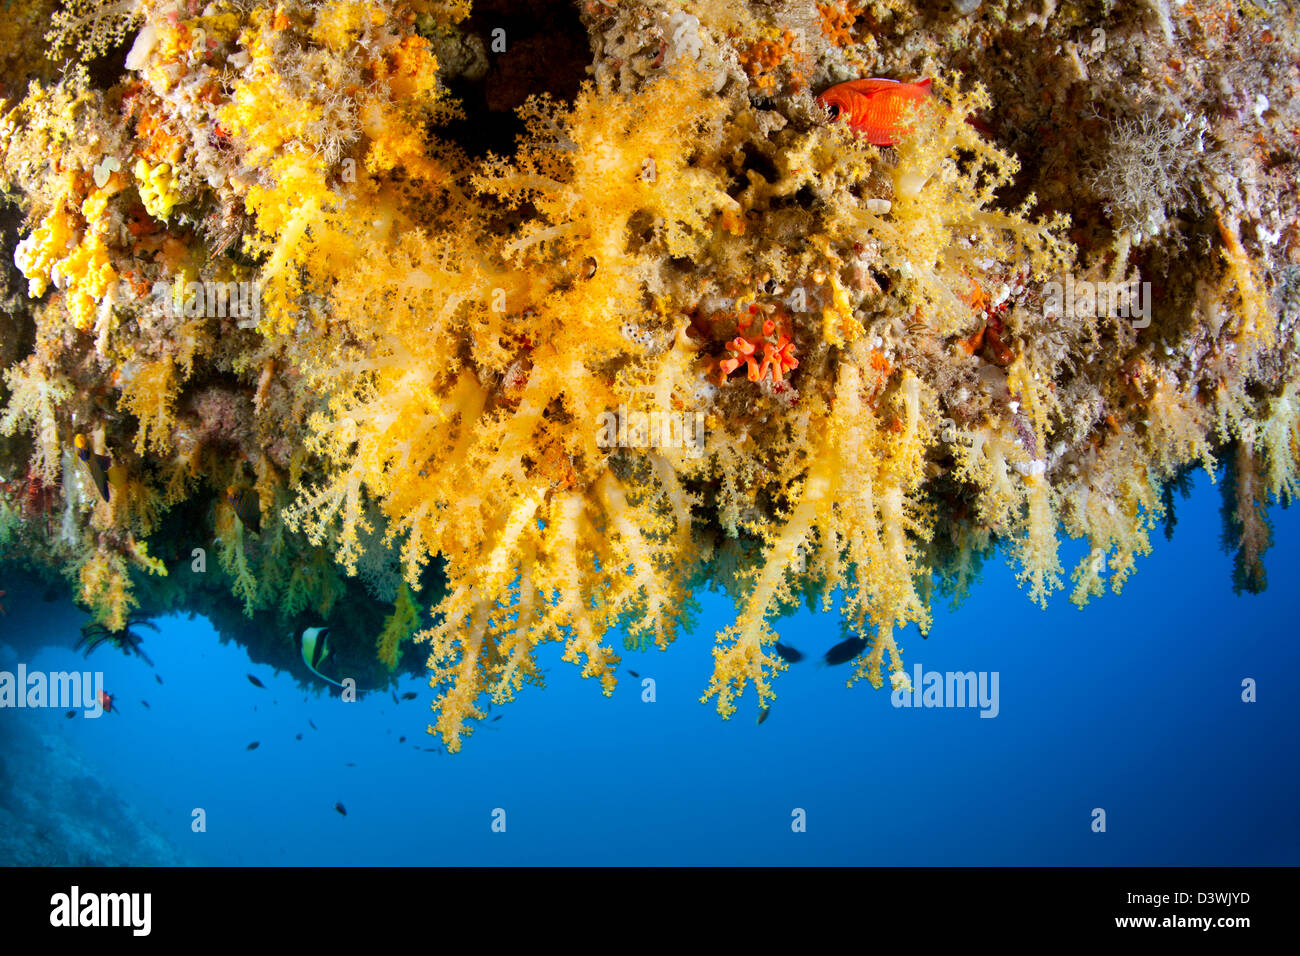 Overhang with yellow Softcorals, Dendronephthya sp., Ari Atoll, Maldives Stock Photo